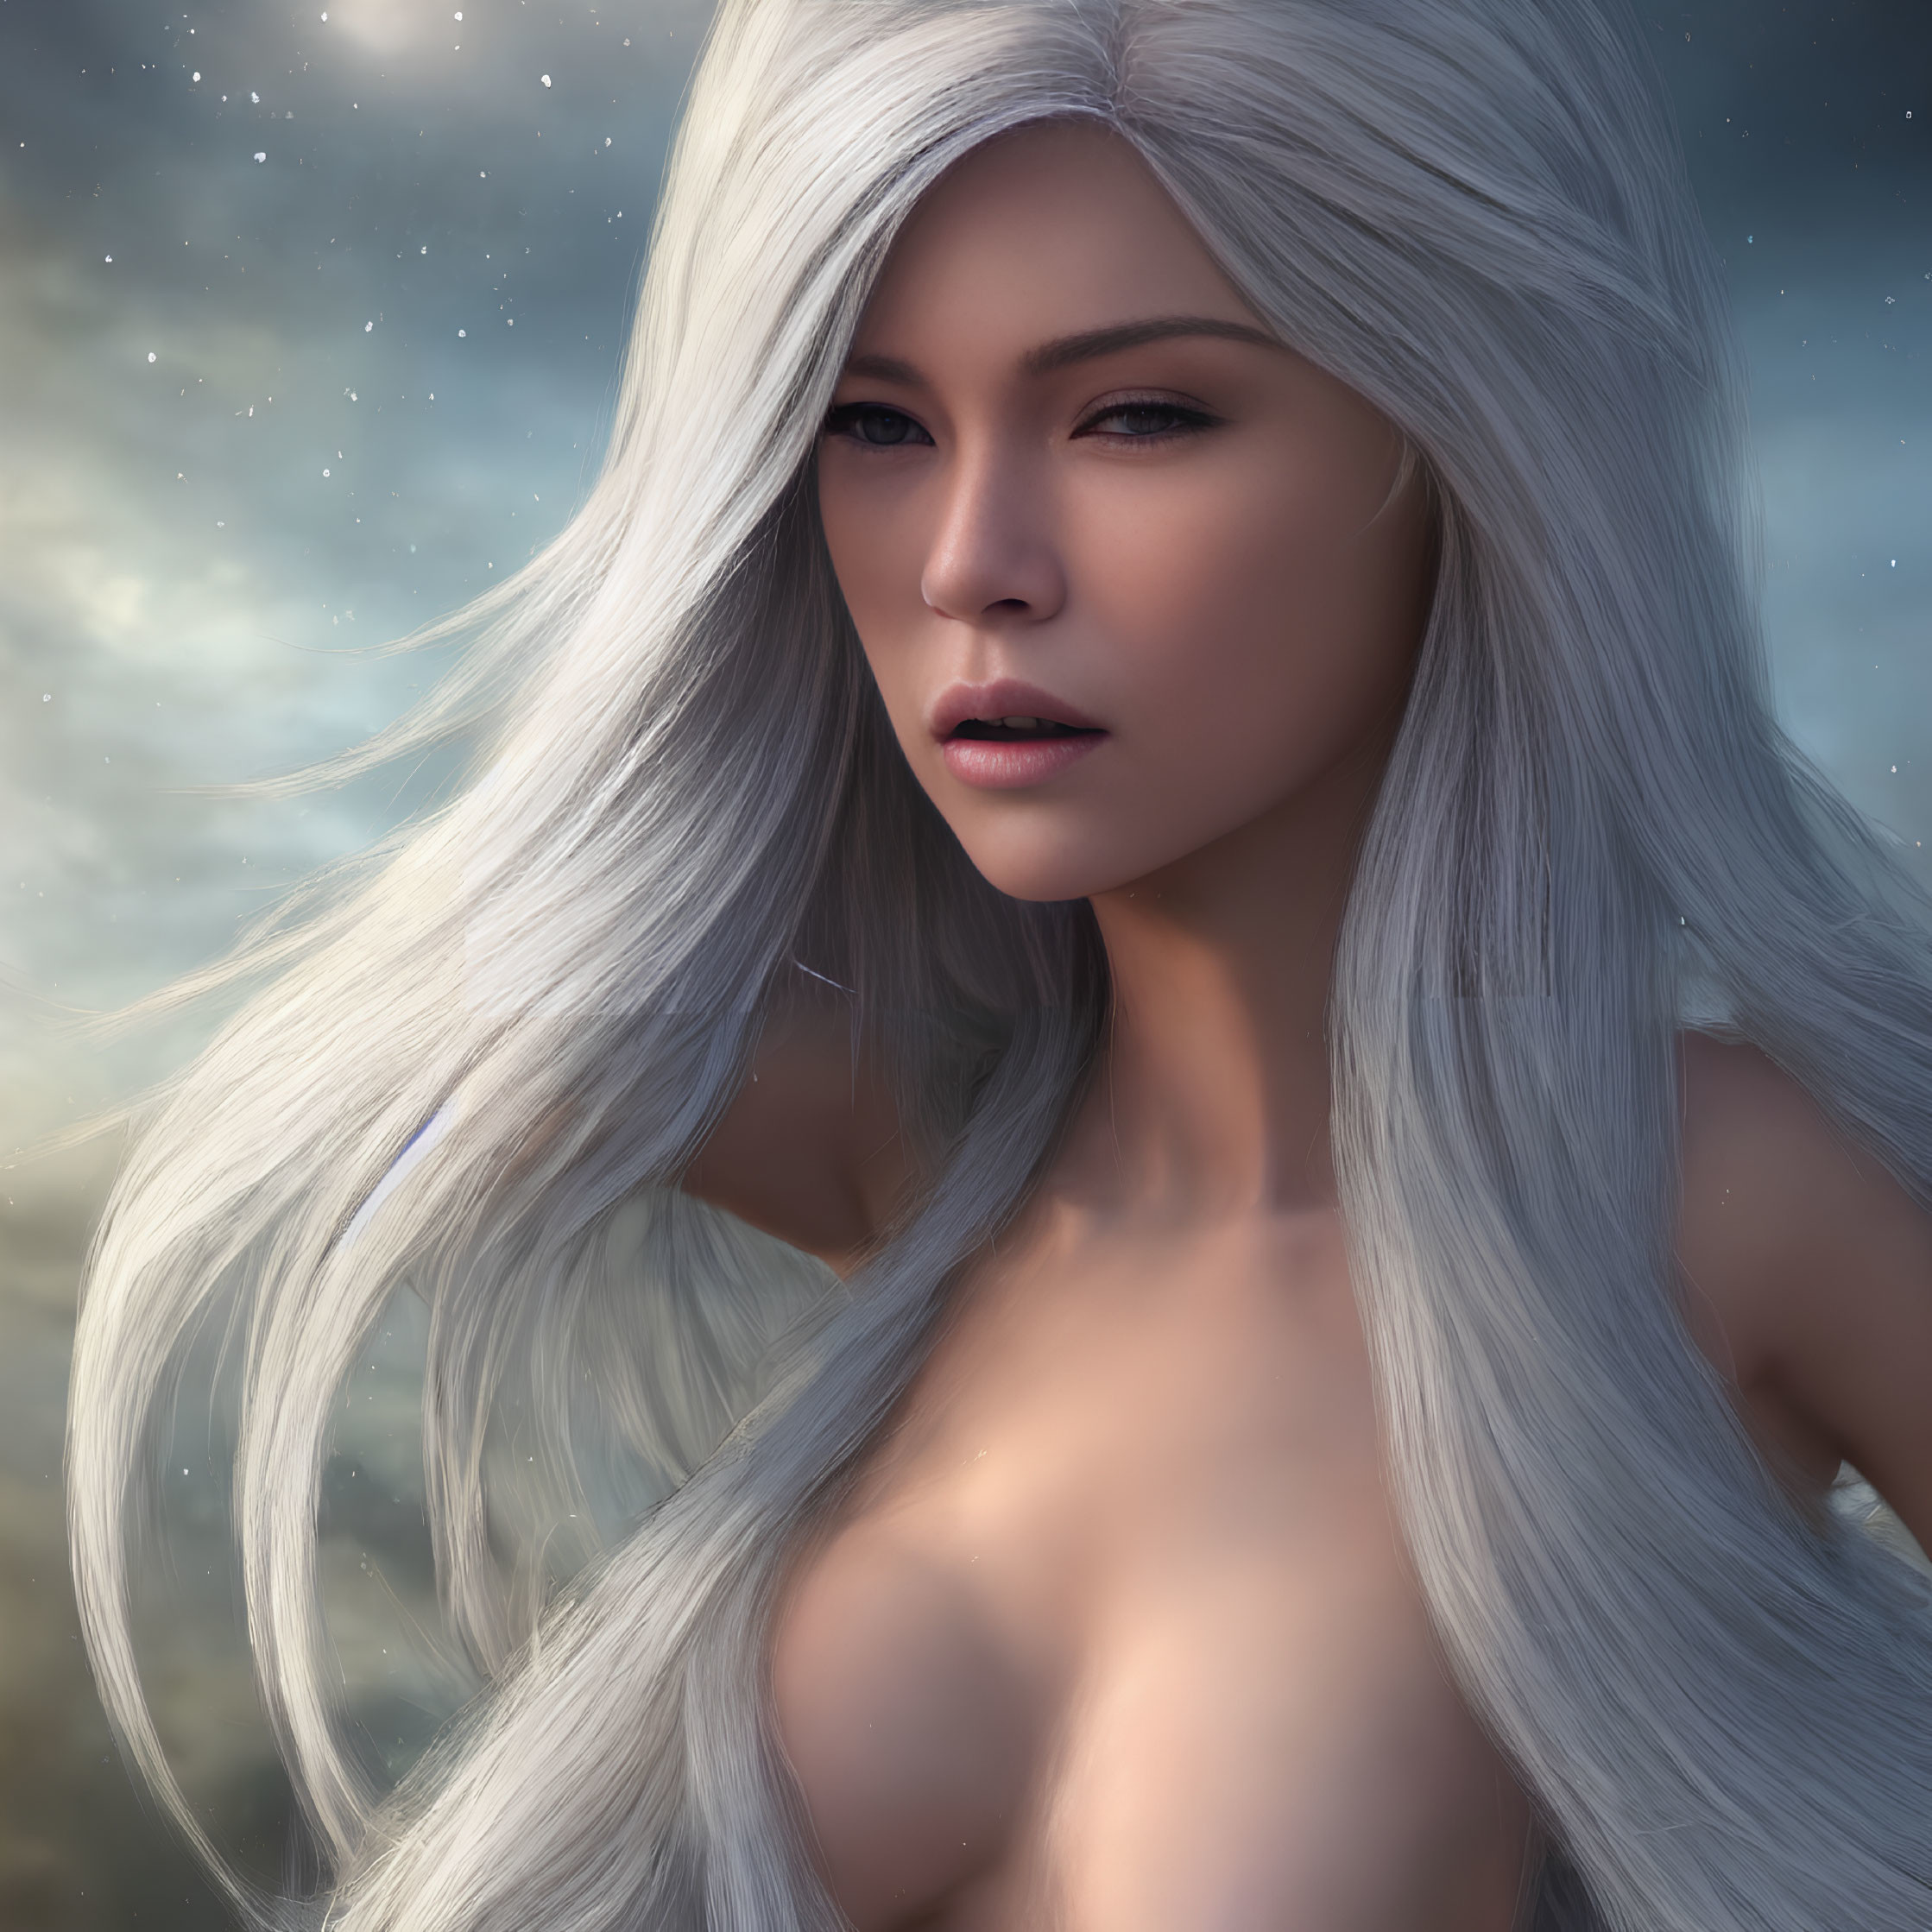 Digital portrait of woman with long white hair and fair skin against starry sky